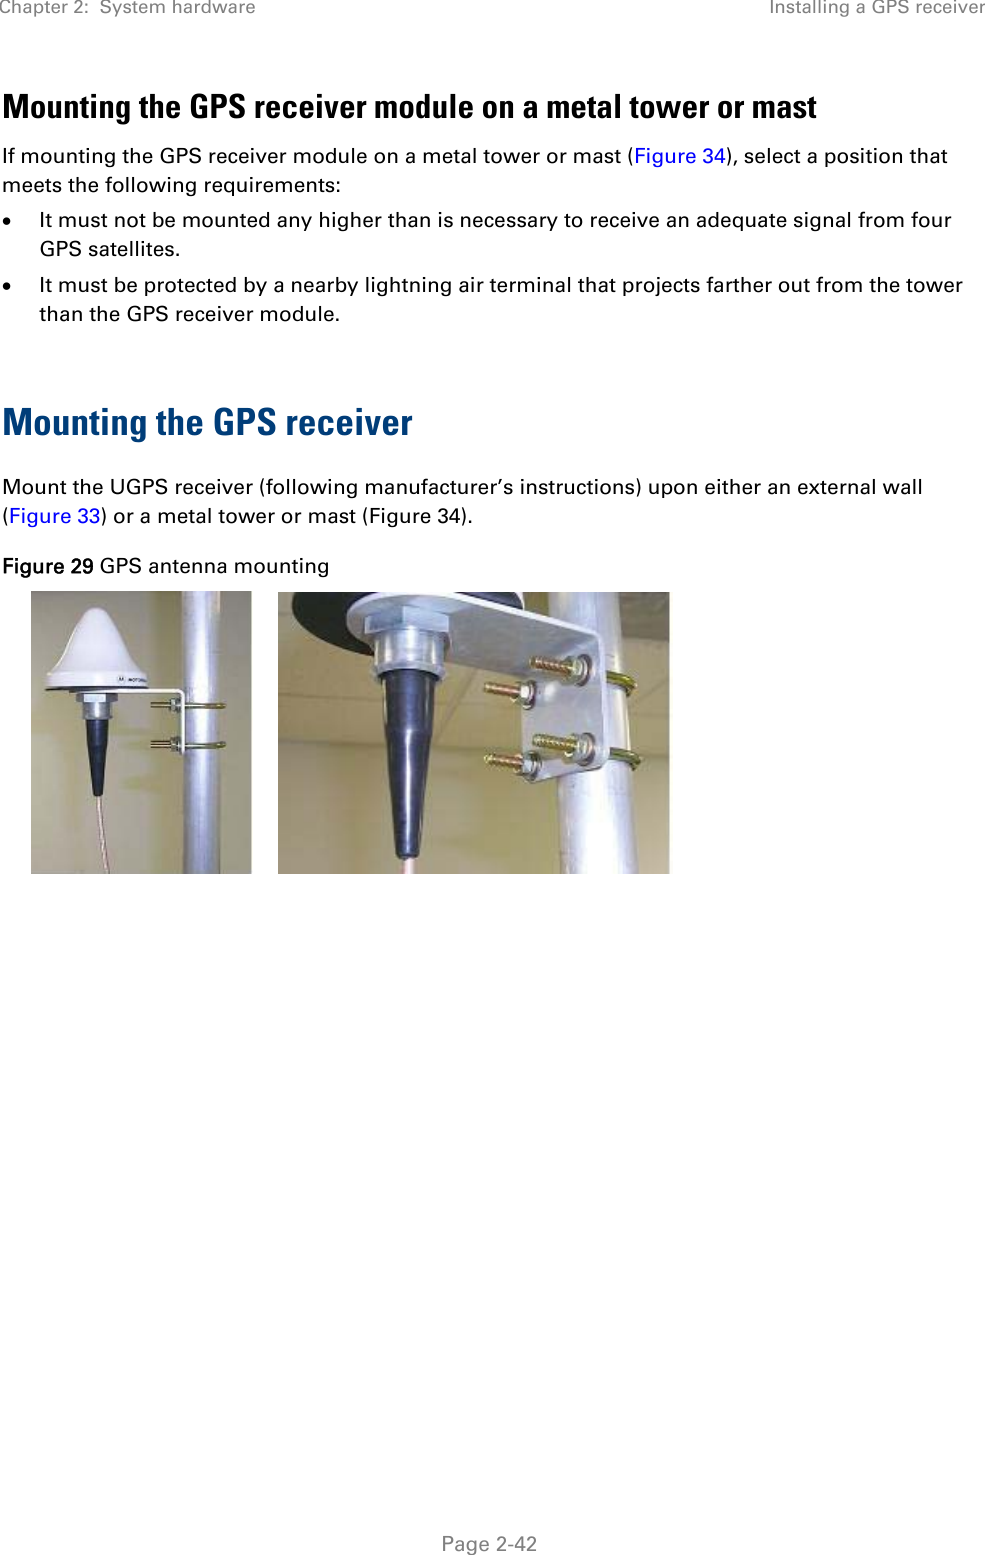 Chapter 2:  System hardware  Installing a GPS receiver   Page 2-42 Mounting the GPS receiver module on a metal tower or mast If mounting the GPS receiver module on a metal tower or mast (Figure 34), select a position that meets the following requirements:  It must not be mounted any higher than is necessary to receive an adequate signal from four GPS satellites.  It must be protected by a nearby lightning air terminal that projects farther out from the tower than the GPS receiver module.  Mounting the GPS receiver Mount the UGPS receiver (following manufacturer’s instructions) upon either an external wall (Figure 33) or a metal tower or mast (Figure 34). Figure 29 GPS antenna mounting    